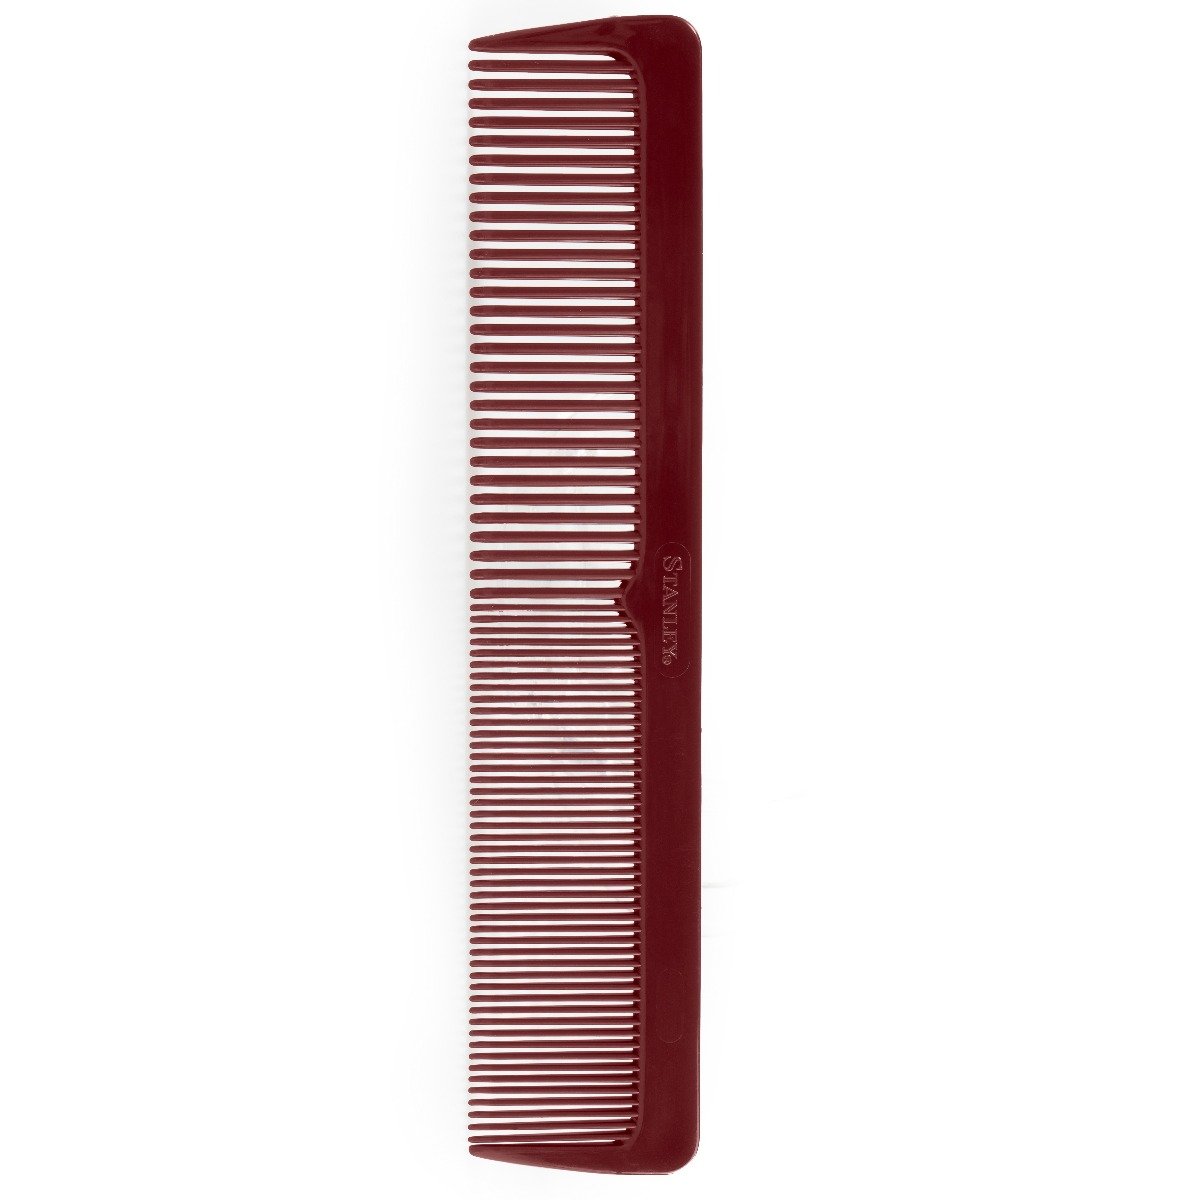 Essentials Ladies Comb, Dual Sided Coarse and Fine Tooth Design - Mulberry-Combs-Fuller Brush Company